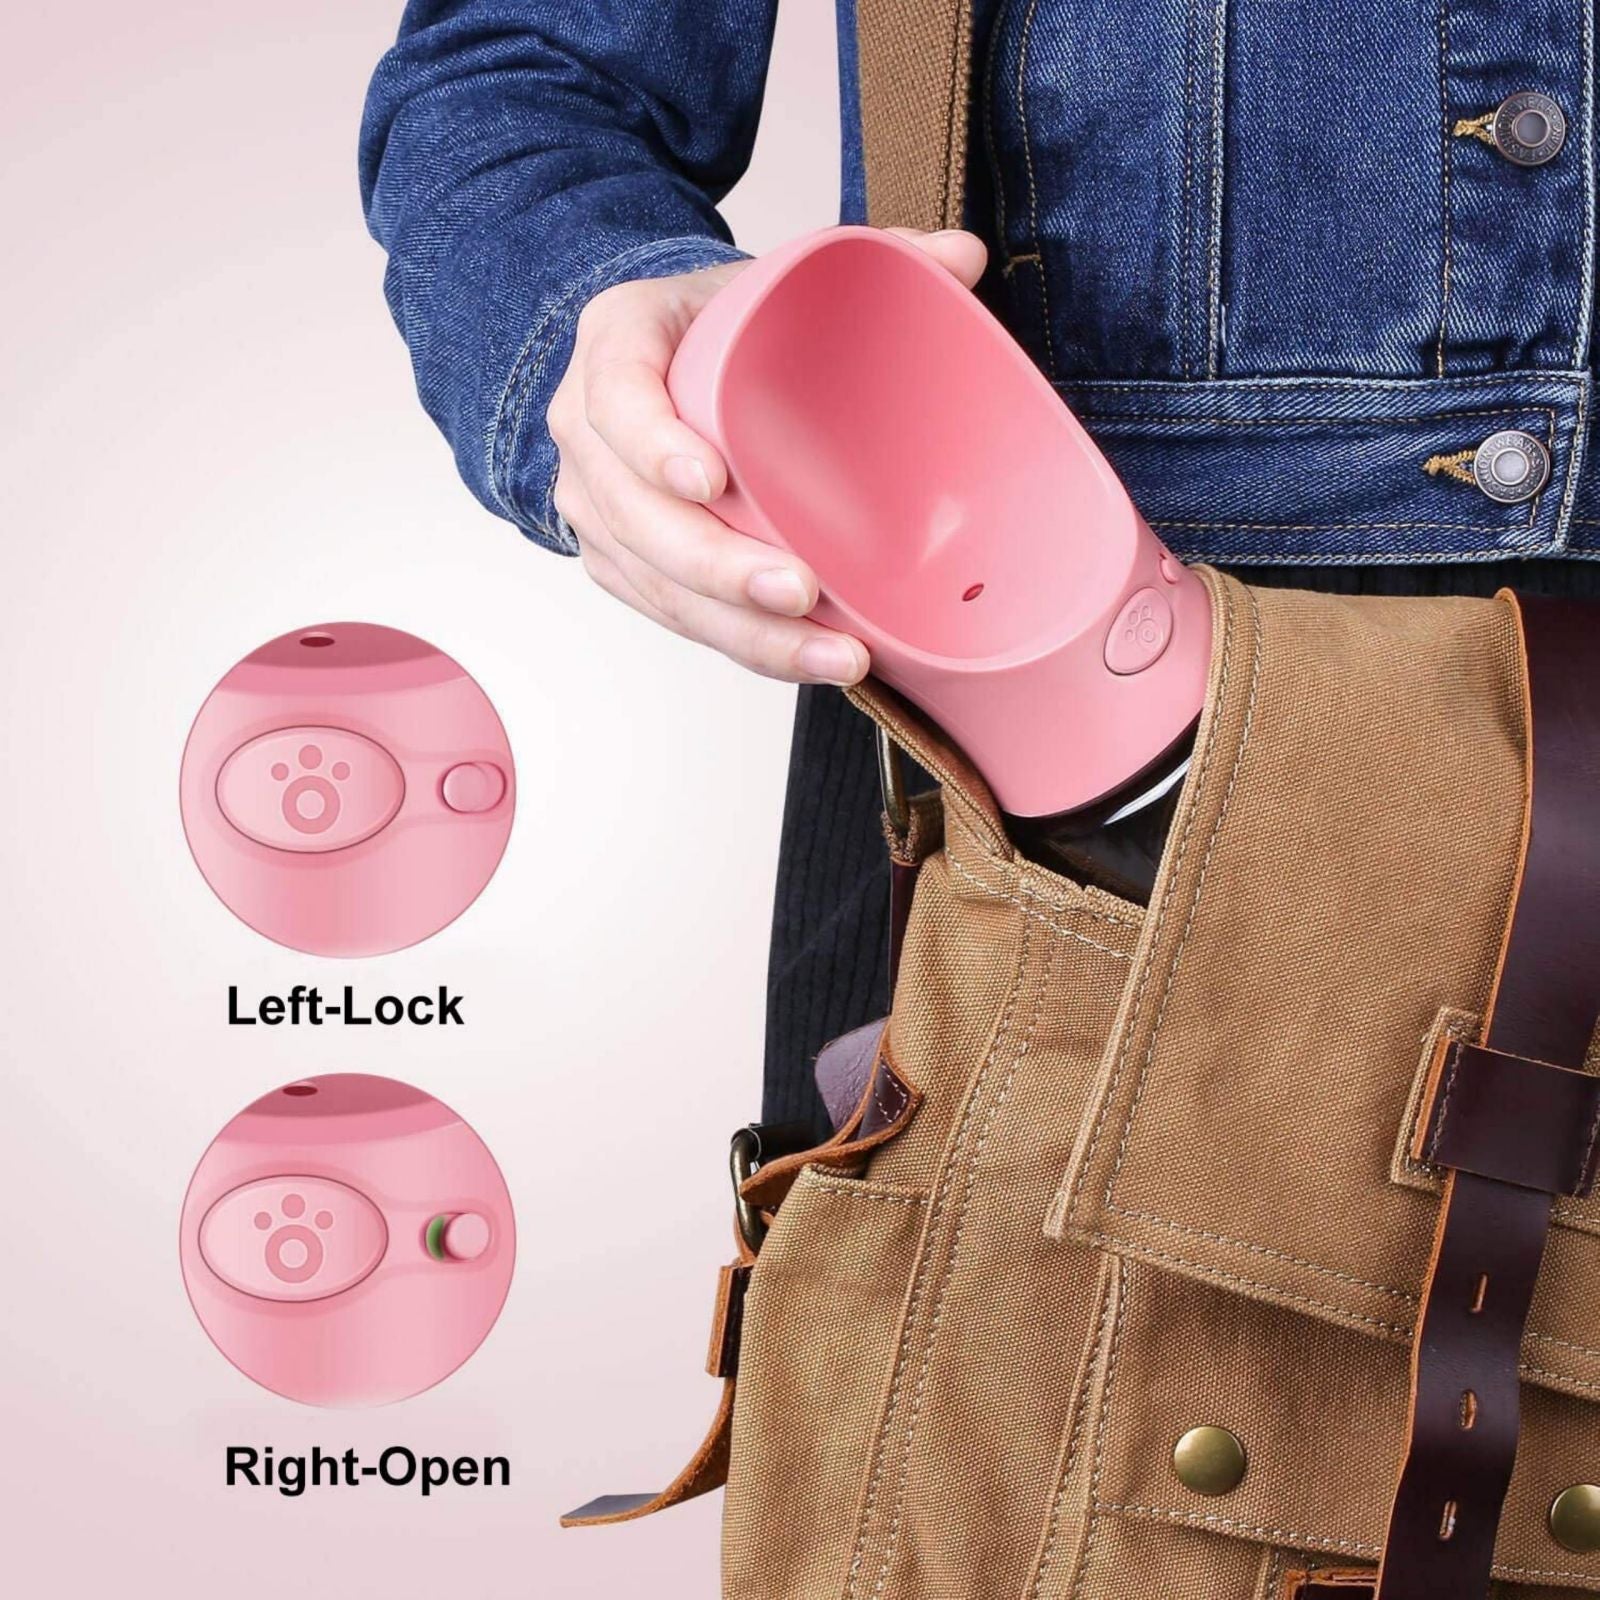 Pet Travel Water Bottle for Dogs Portable Puppy Water Bottle, Leak-Proof Water Bottle with Drinking Bowl 350ML/ 12OZ